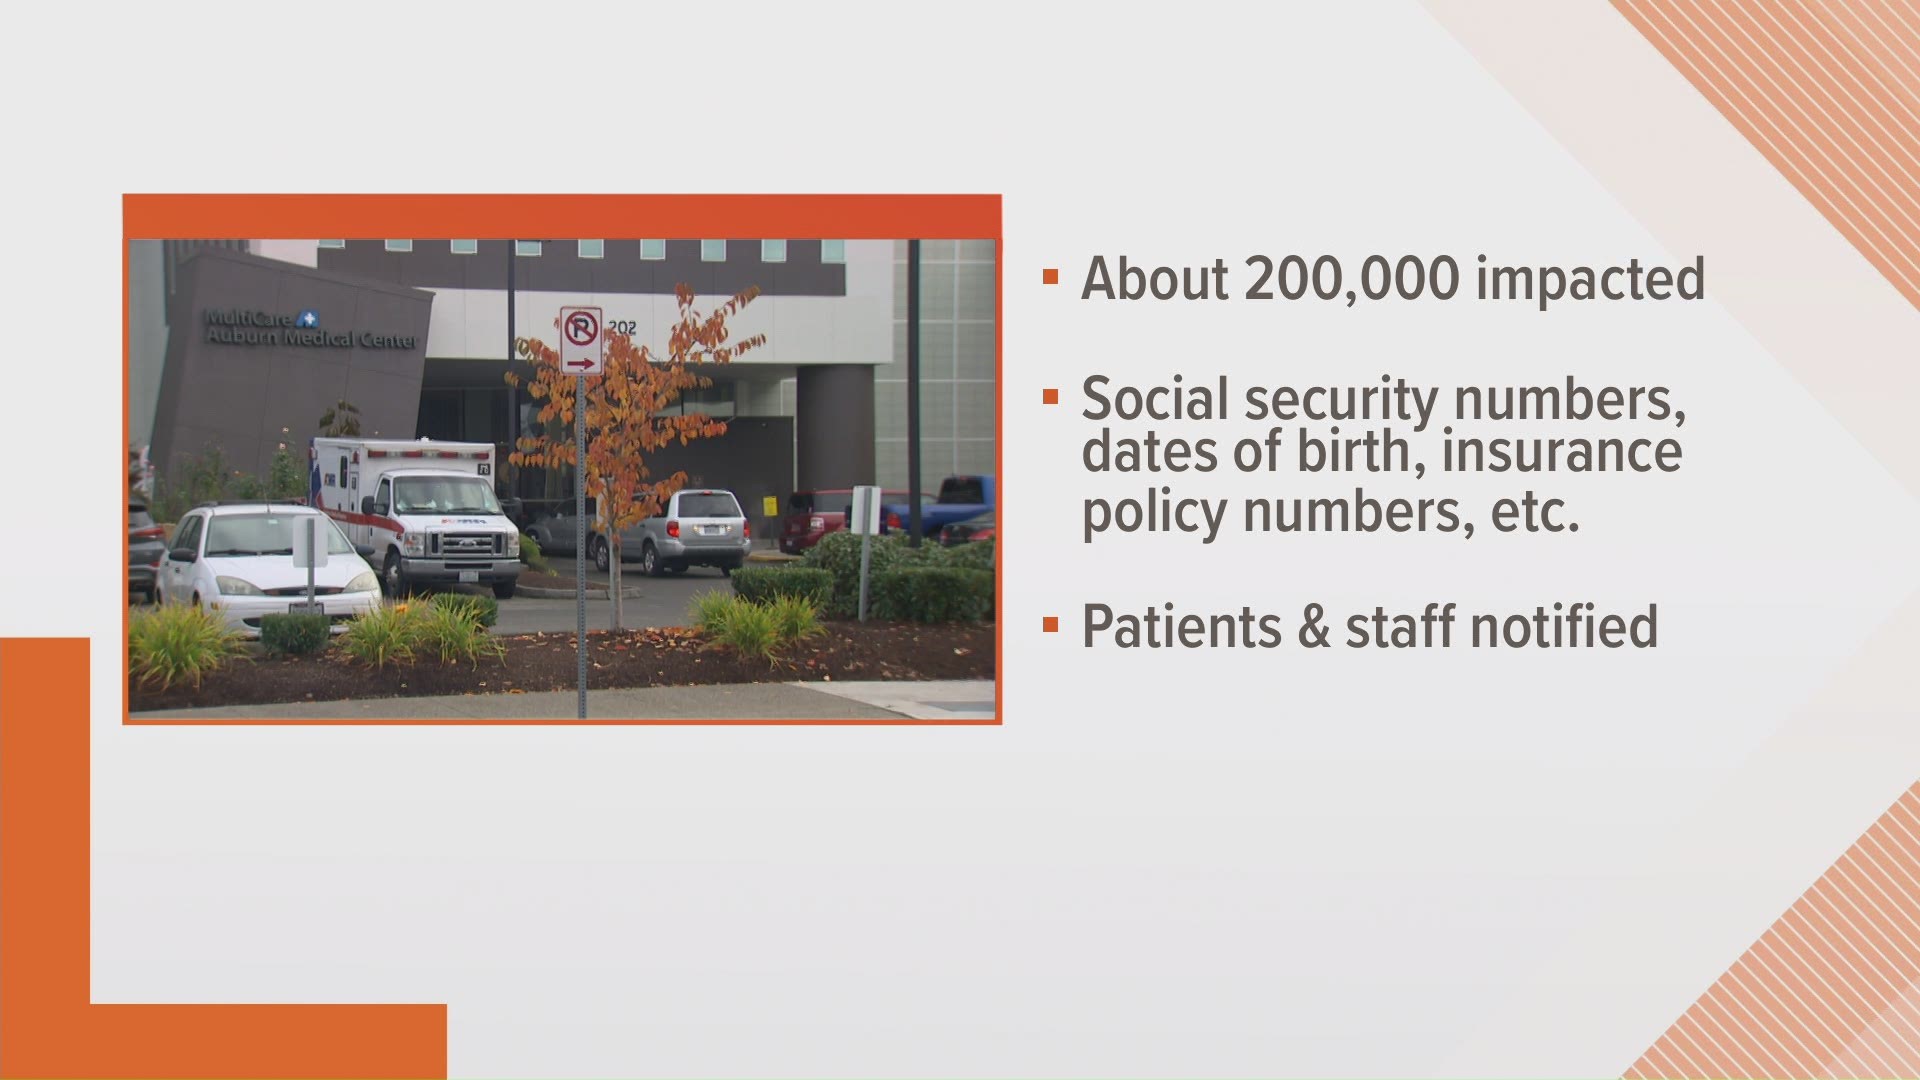 The information of around 200,000 patients and staff could have been compromised in the breach.